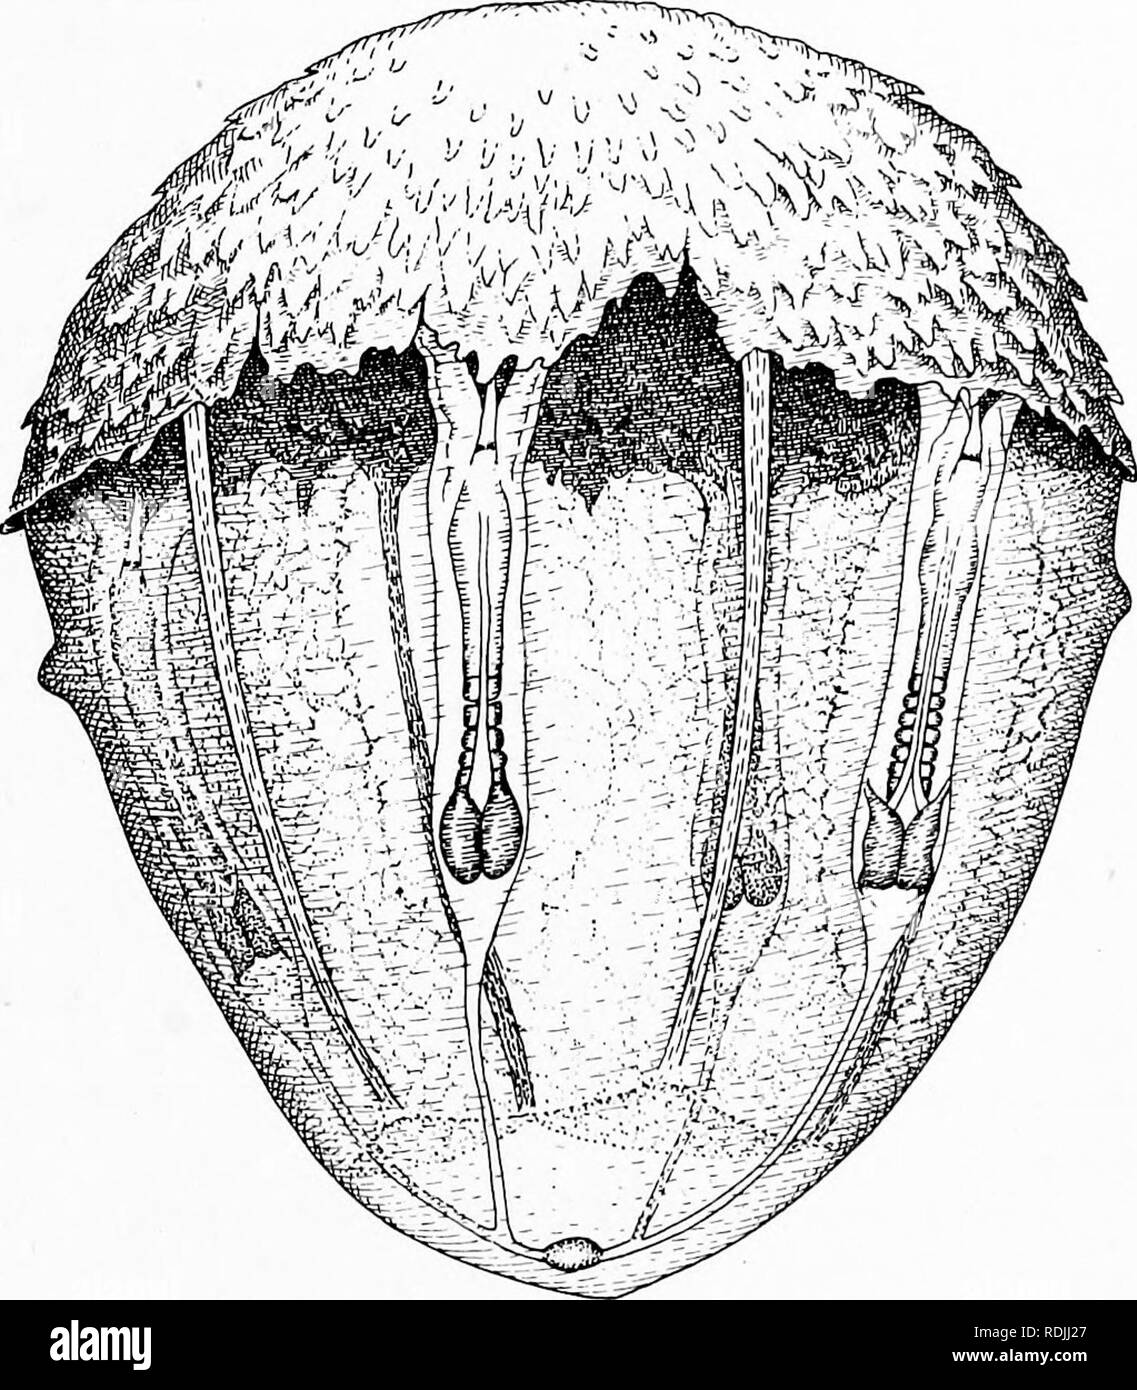 . The biology of twins (mammals) . Twins. TWINNING IN DASYPUS NOVEMCINCTUS 57 Vitelline blood vessels, arranged somewhat as in the area pellucida and area opaqua of the avian egg, are. Fig. i8.—Armadillo egg showing that the primary embryos (II and IV) are in advance of the secondary embryos (I and III). The primary placenta as Trager is becoming displaced by the secondary true placenta, which is covered with villi, or short finger-like processes (see stage X). (Redrawn from Newman and Patterson.) very characteristic features of this stage; no blood is found in this vitelline area and no vitel Stock Photo